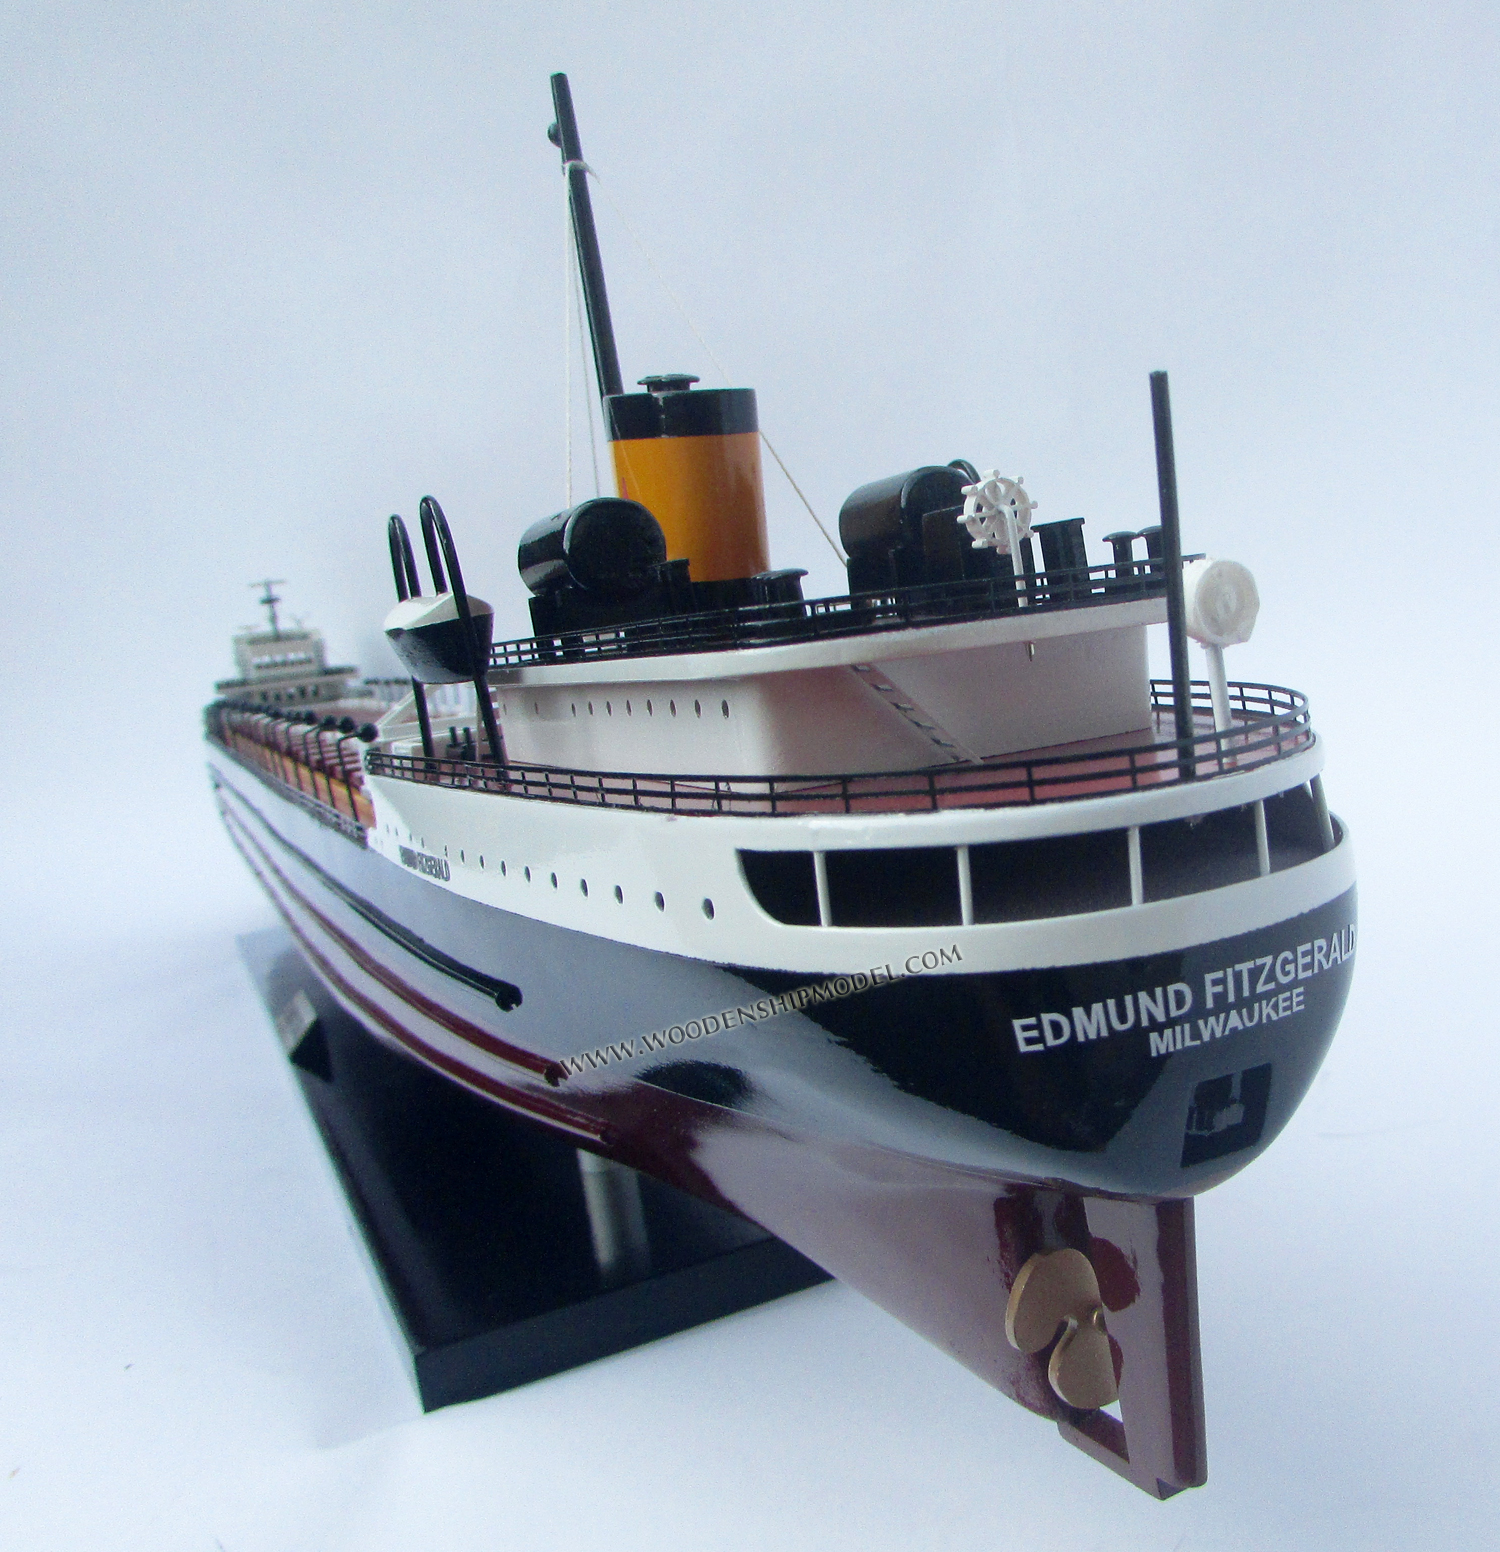 SS Edmund Fitzgerald was an American Great Lakes freighter that sank in a Lake Superior storm on November 10, 1975, with the loss of the entire crew of 29. When launched on June 8, 1958, she was the largest ship on North America's Great Lakes, and she remains the largest to have sunk there. tanker model freighter SS Edmund Fitzgerald, ship model Edmund Fitzgerald, model ship Edmund Fitzgerald, SS Edmund Fitzgerald American Great Lakes Freighter Cargo Ship 40 inch, display freighter model SS Edmund Fitzgerald, Canada freighter model ship, great lake freighter  model ship for display, wooden ship model SS Edmund Fitzgerald, wooden boat model SS Edmund Fitzgerald, wooden model boat, Model Tanker freighter cargo SS Edmund Fitzgerald, Jahre Viking, Knock Nevis, algocanada ship model, model ship algocanada, algo canada ship